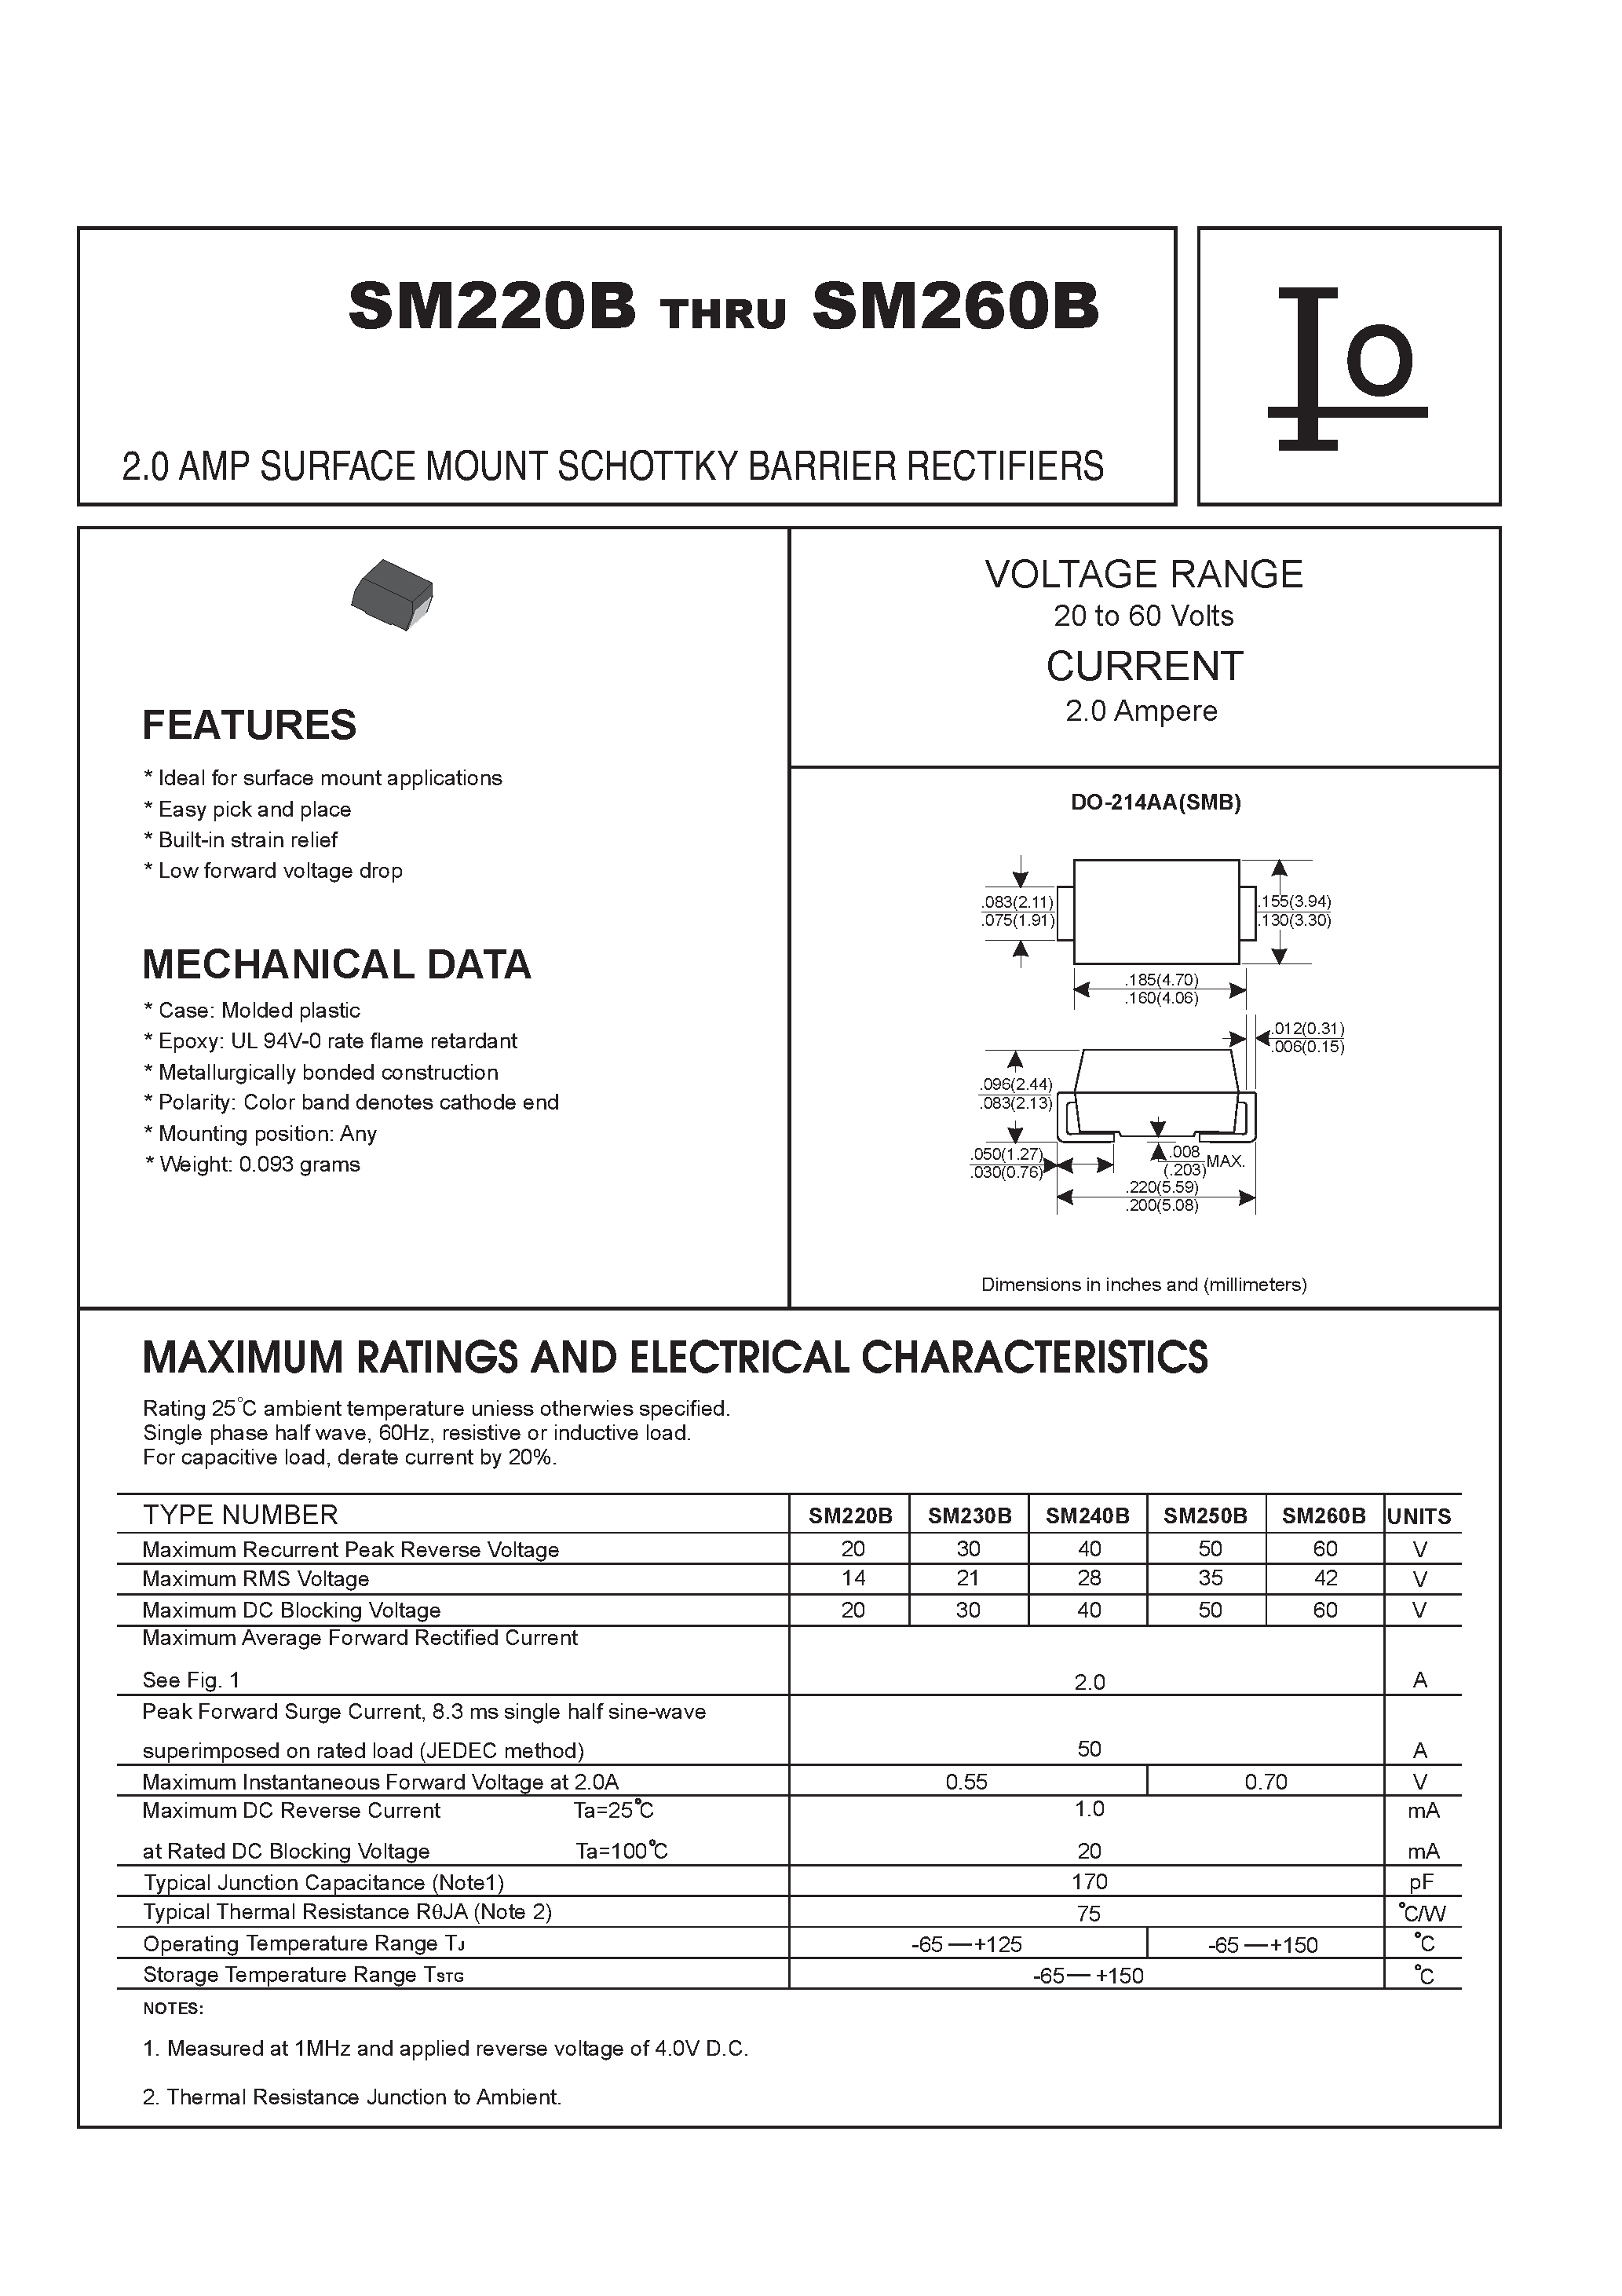 Datasheet SM260B - 2.0 AMP SURFACE MOUNT SCHOTTKY BARRIER RECTIFIERS page 1